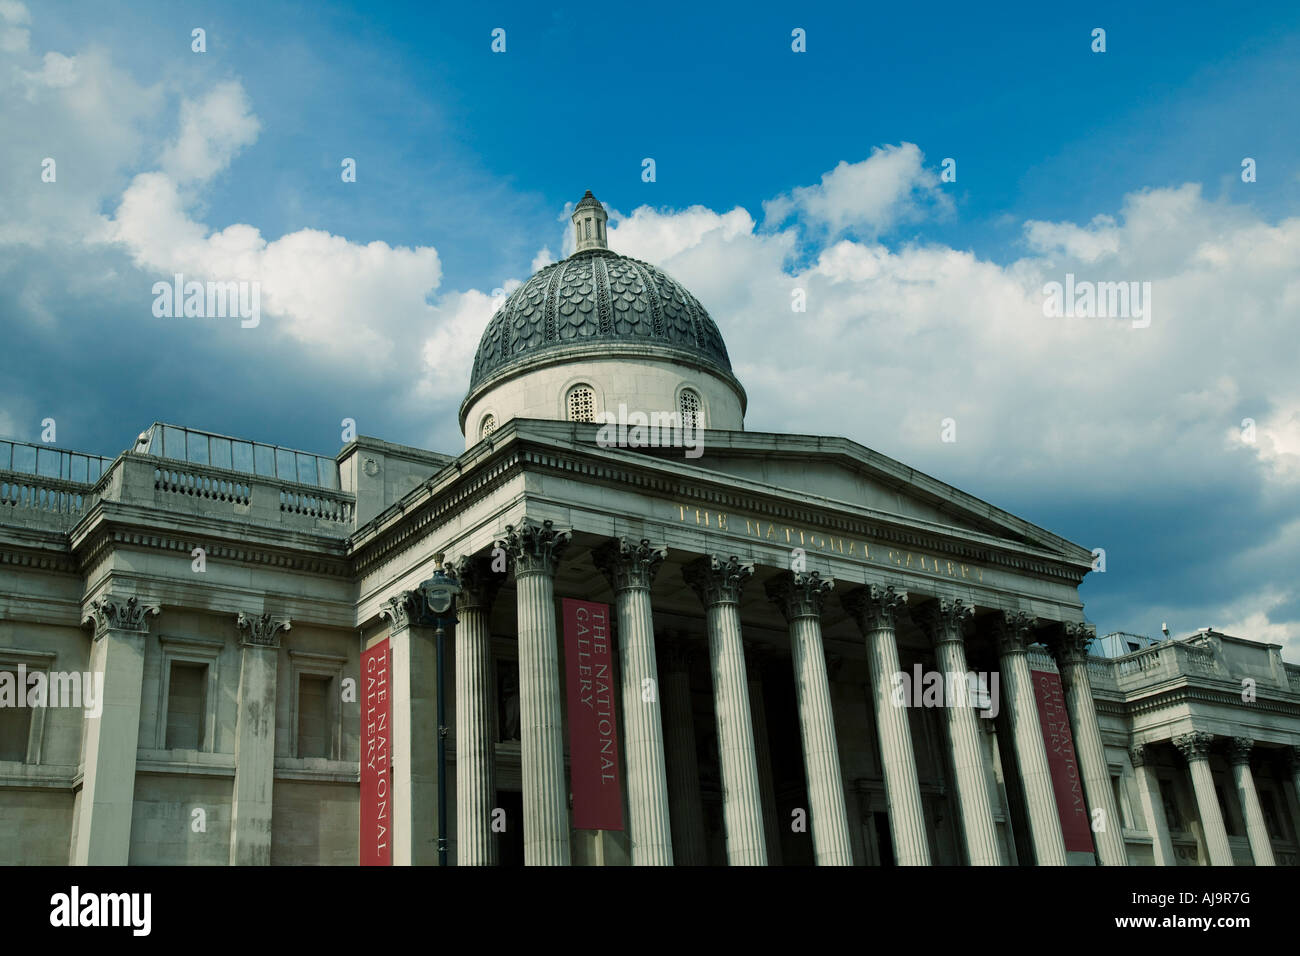 The National Portrait Gallery, London, England Stock Photo